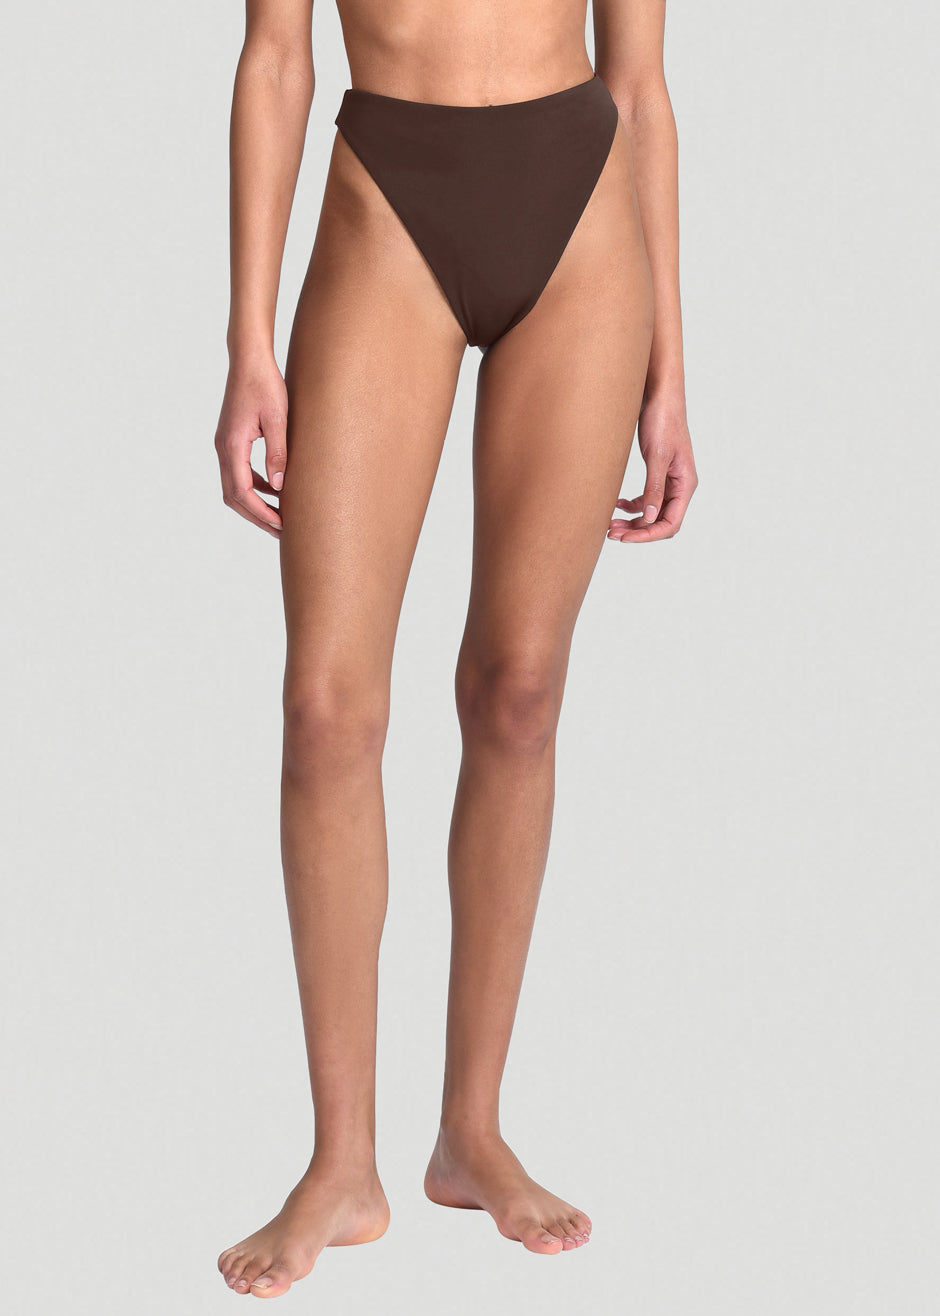 Aexae Triangle High Cut Swimsuit Bottoms - Brown - 1